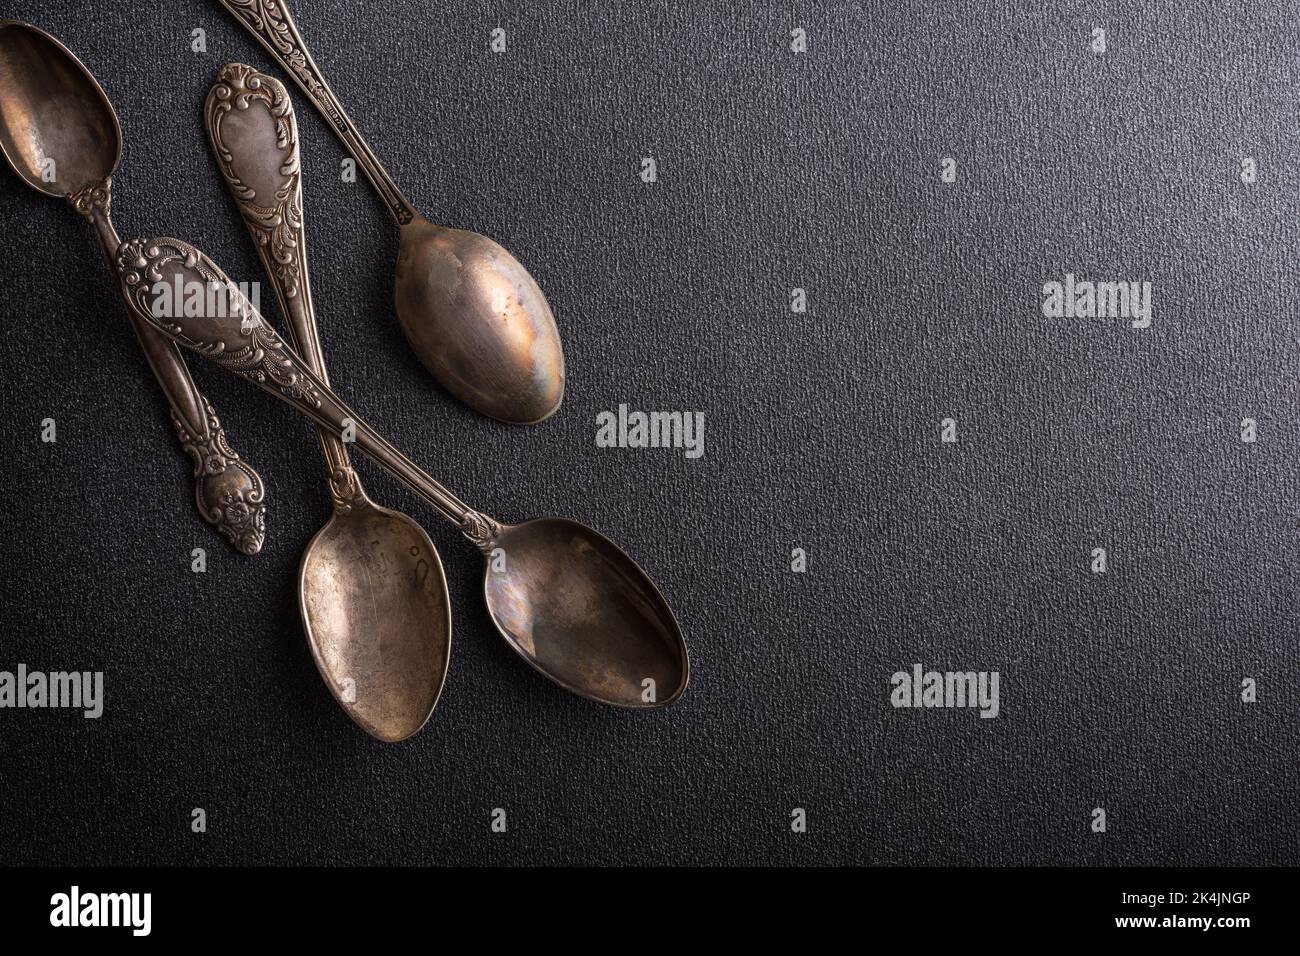 Top view of vintage silver spoons or silverware on dark concrete background with copy space Stock Photo